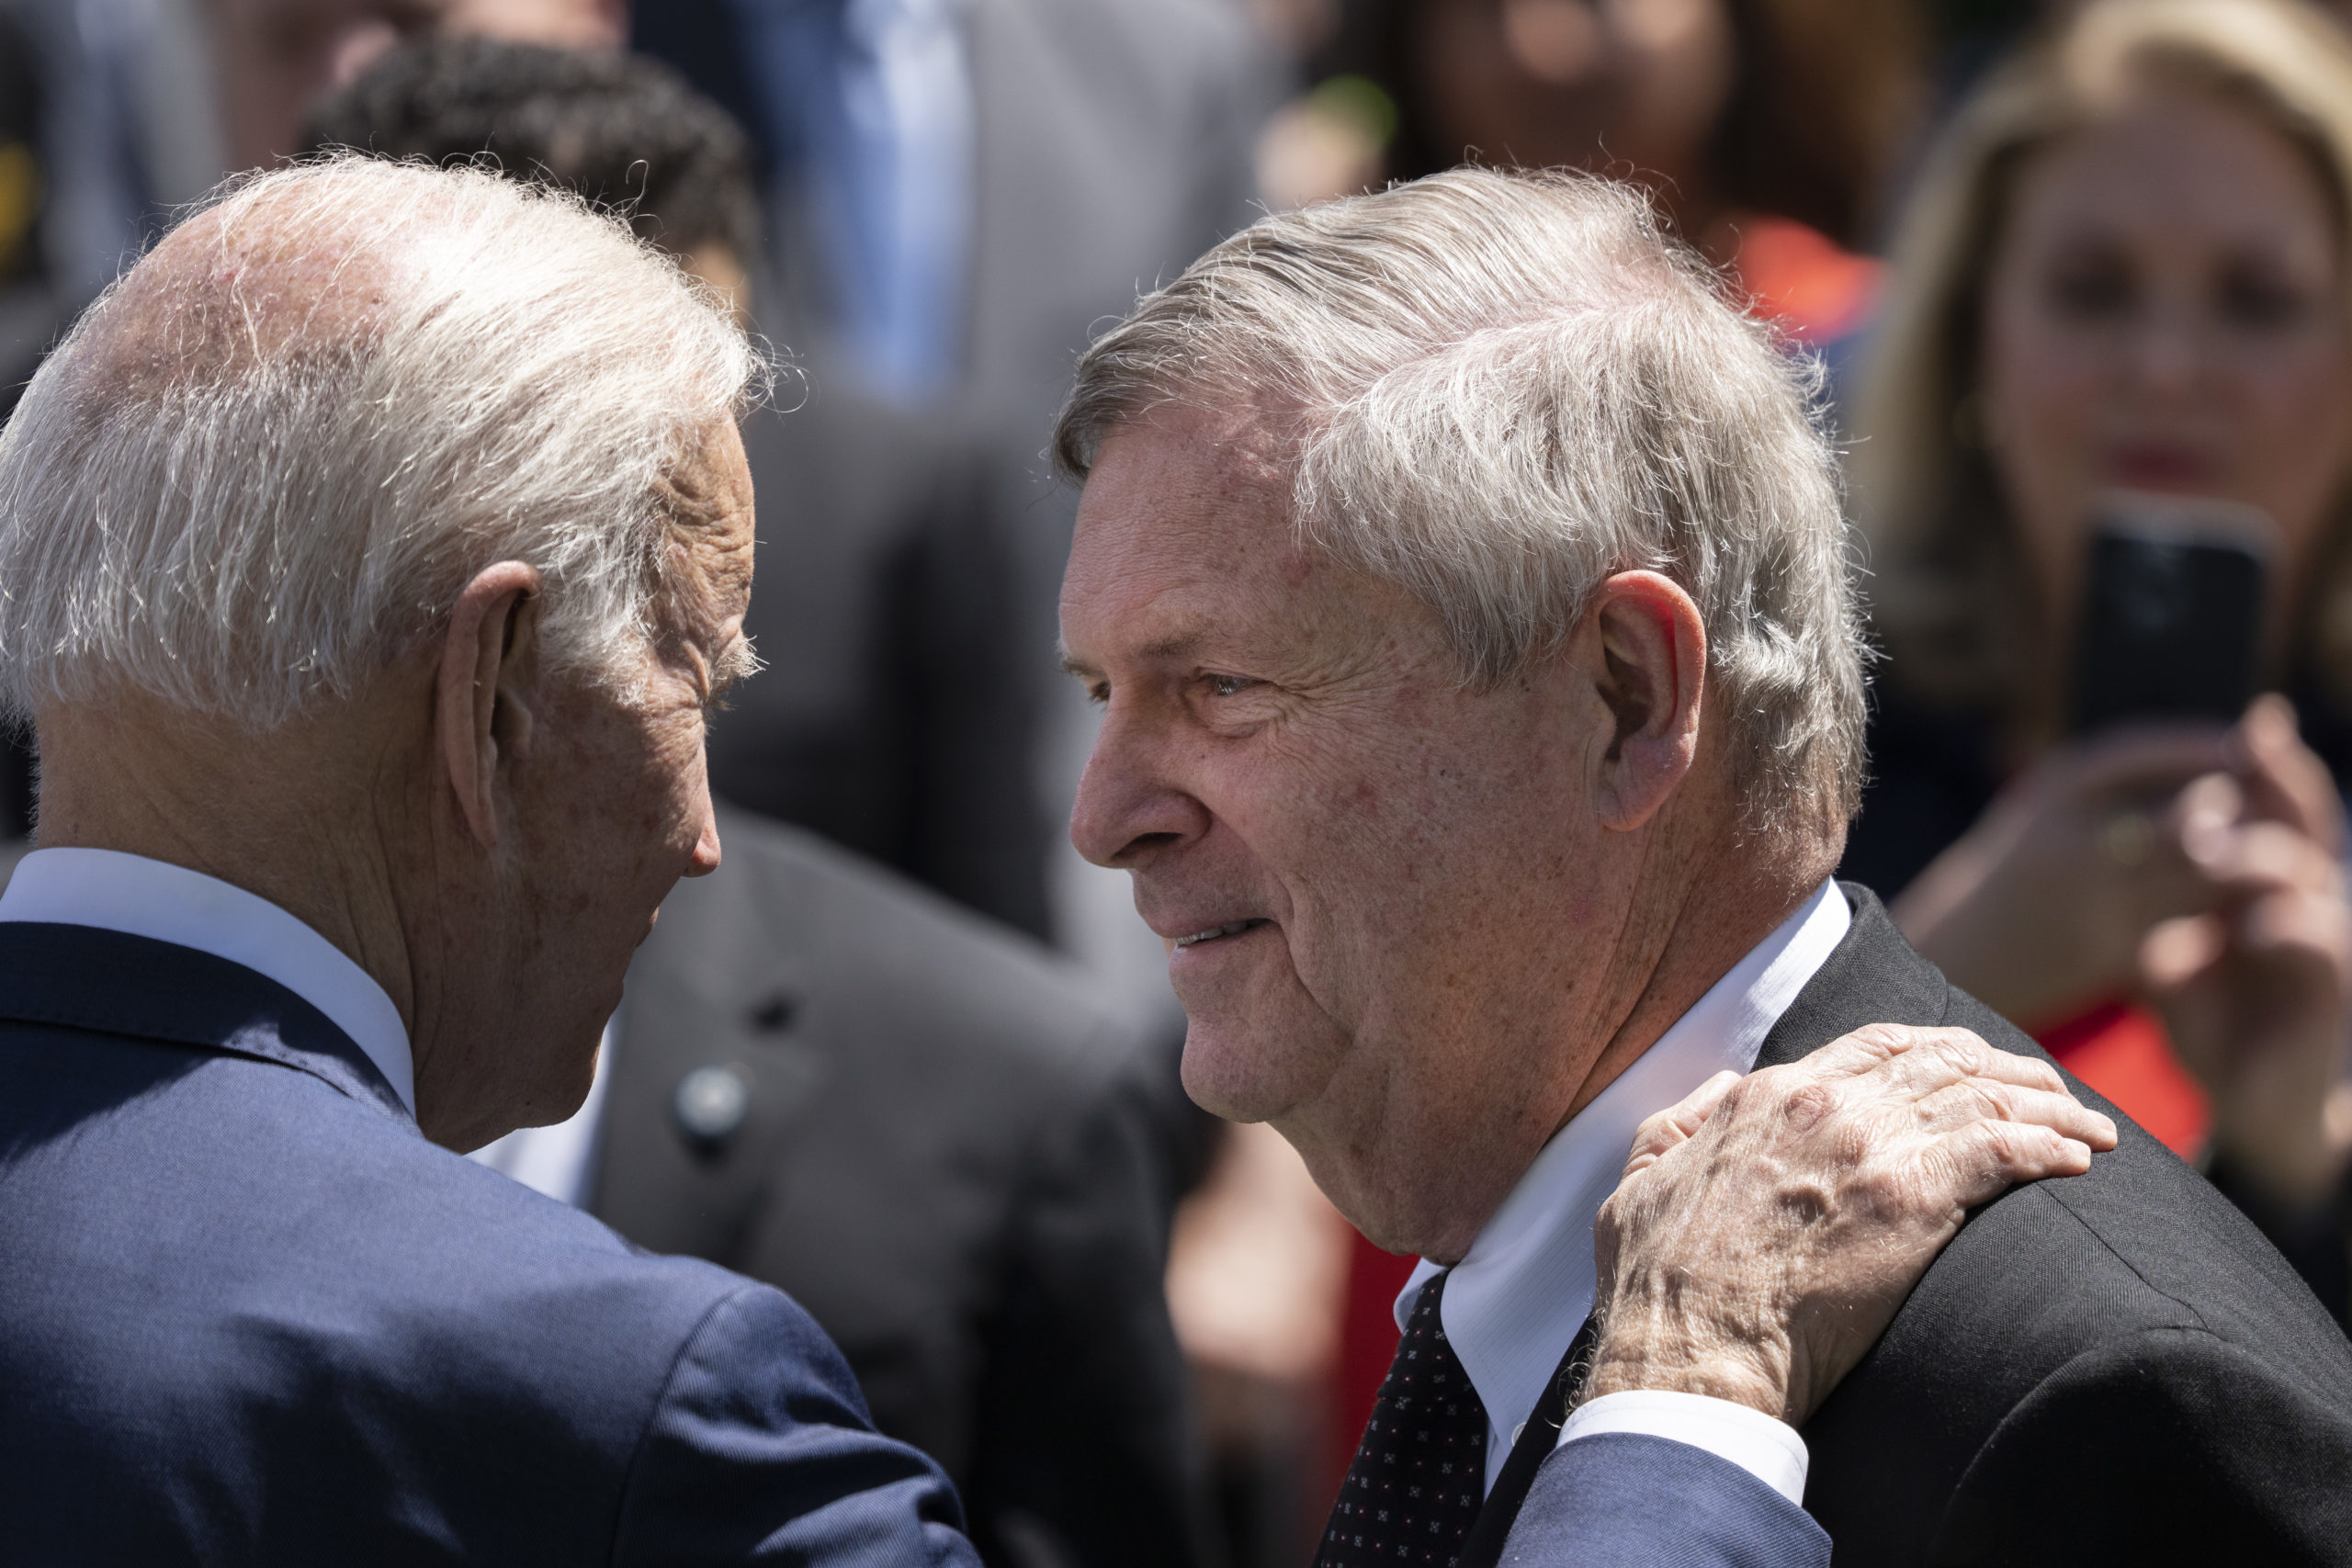 President Joe Biden greets Secretary of Agriculture Tom Vilsack at an event on May 9. (Drew Angerer/Getty Images)